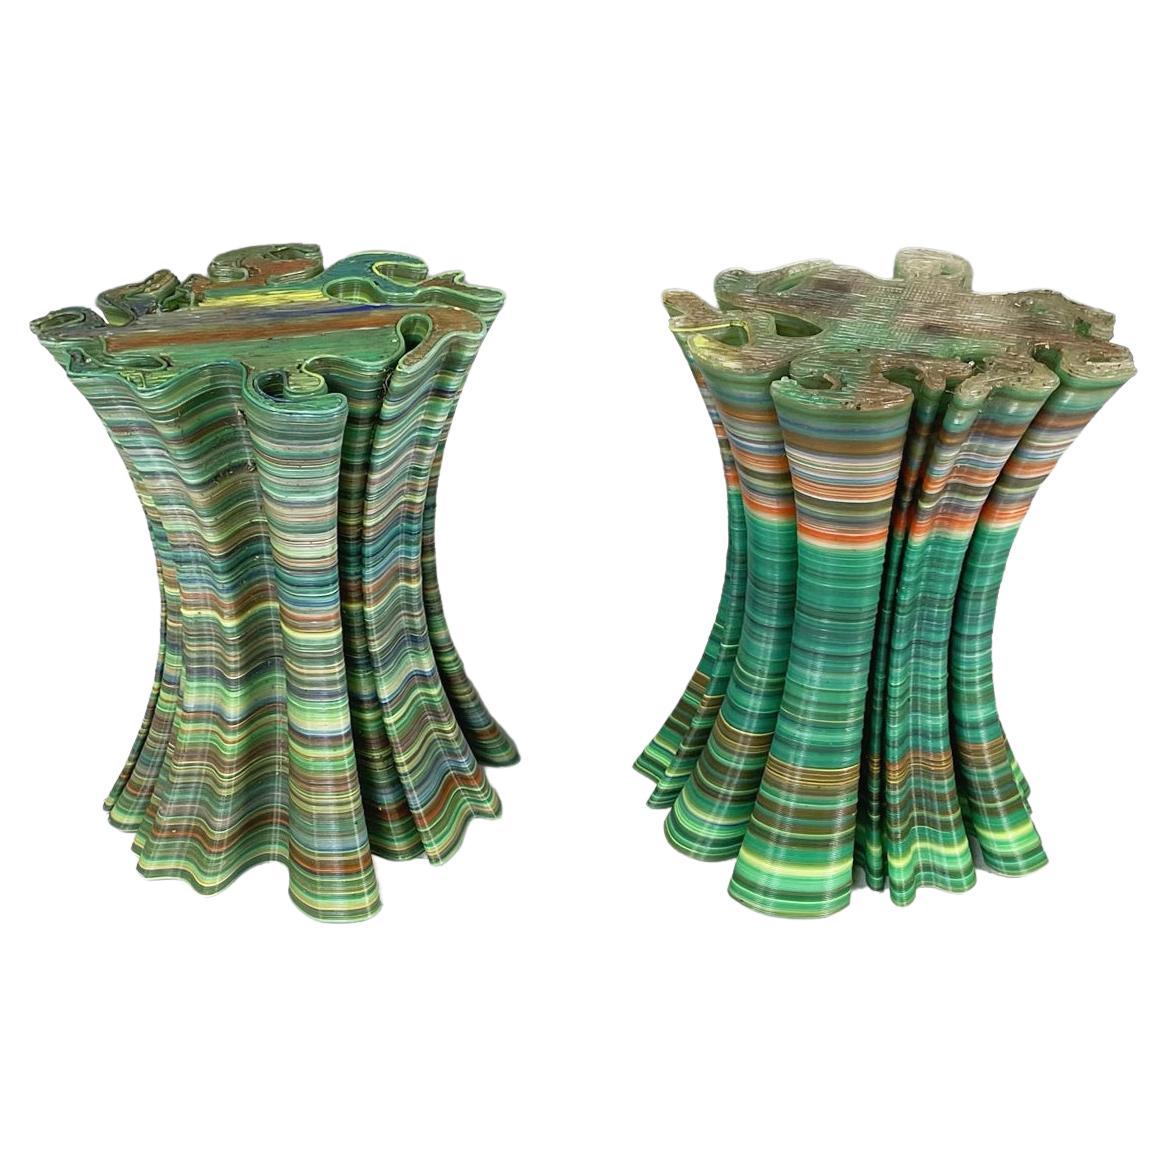 Italian post-modern Garden stools or coffe tables in colored plastic, 2000s